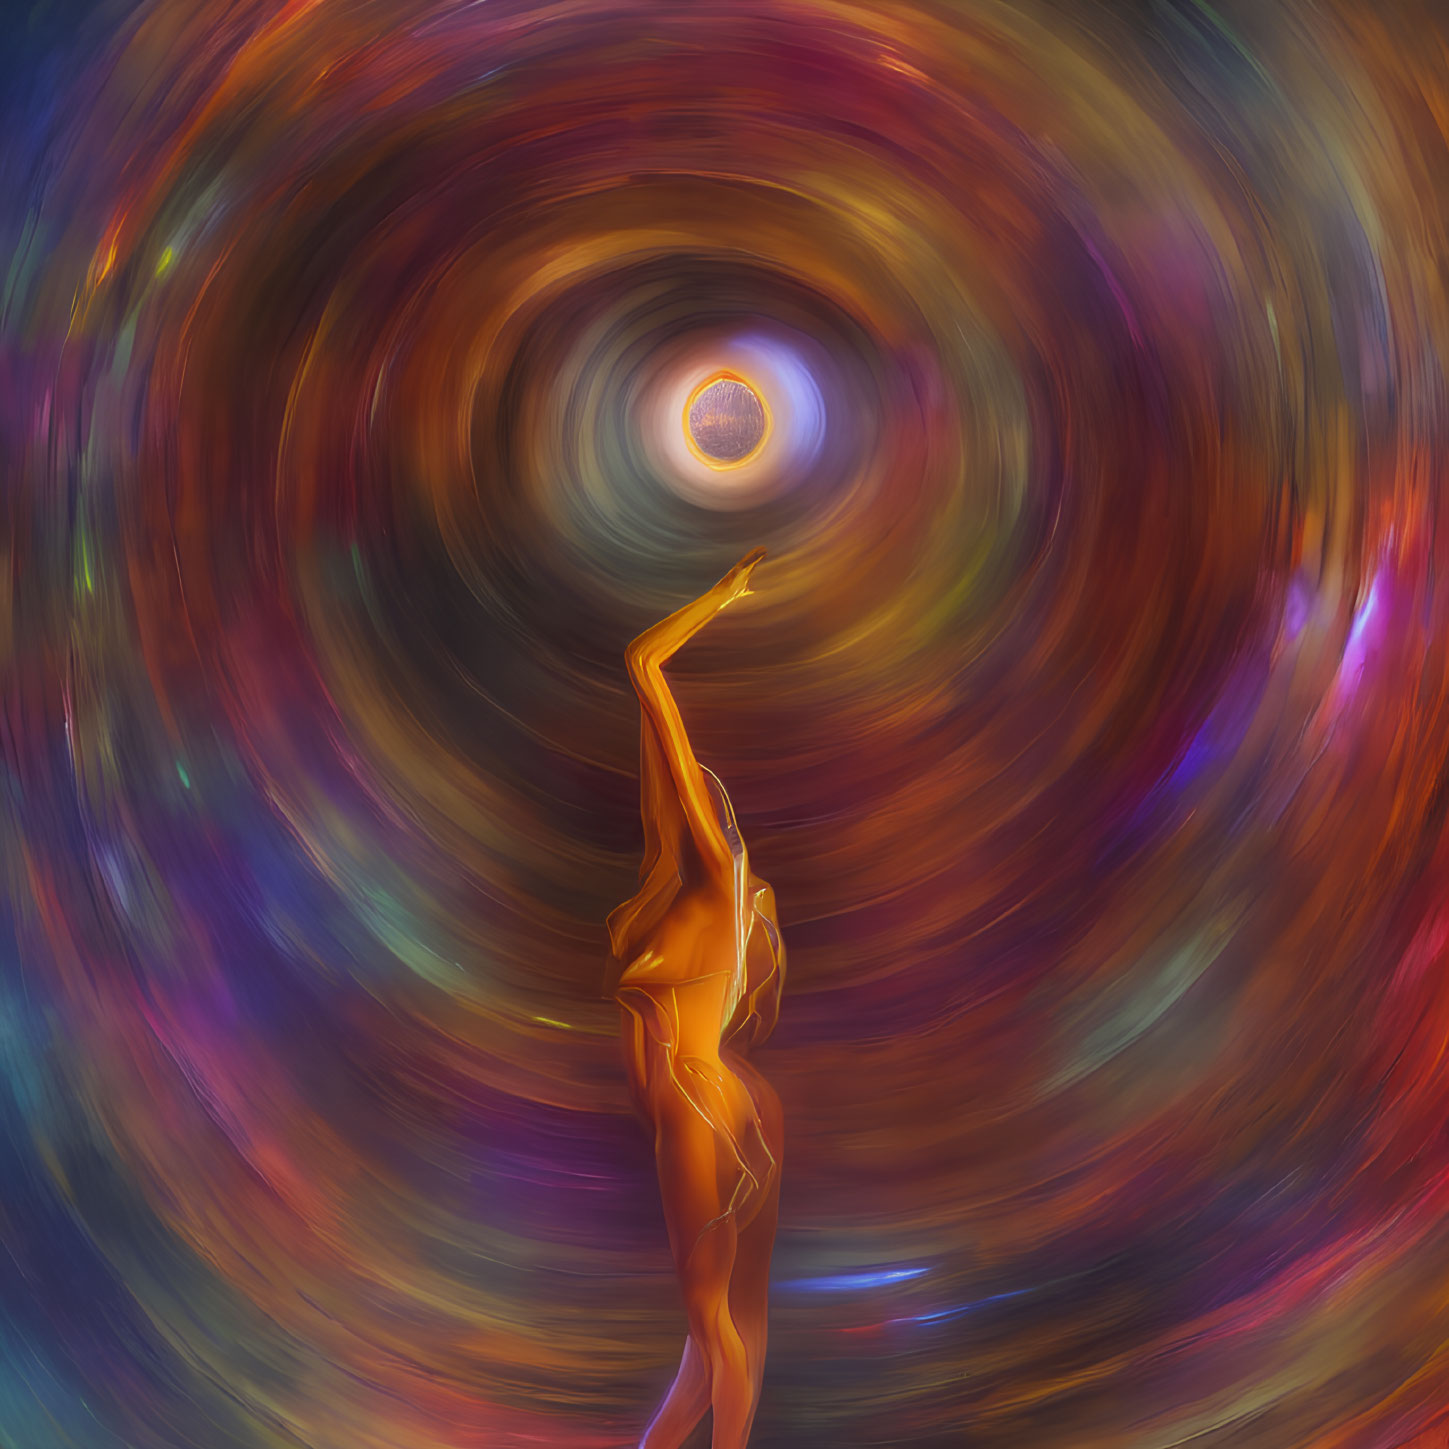 Silhouetted figure reaching for luminous orb in colorful vortex